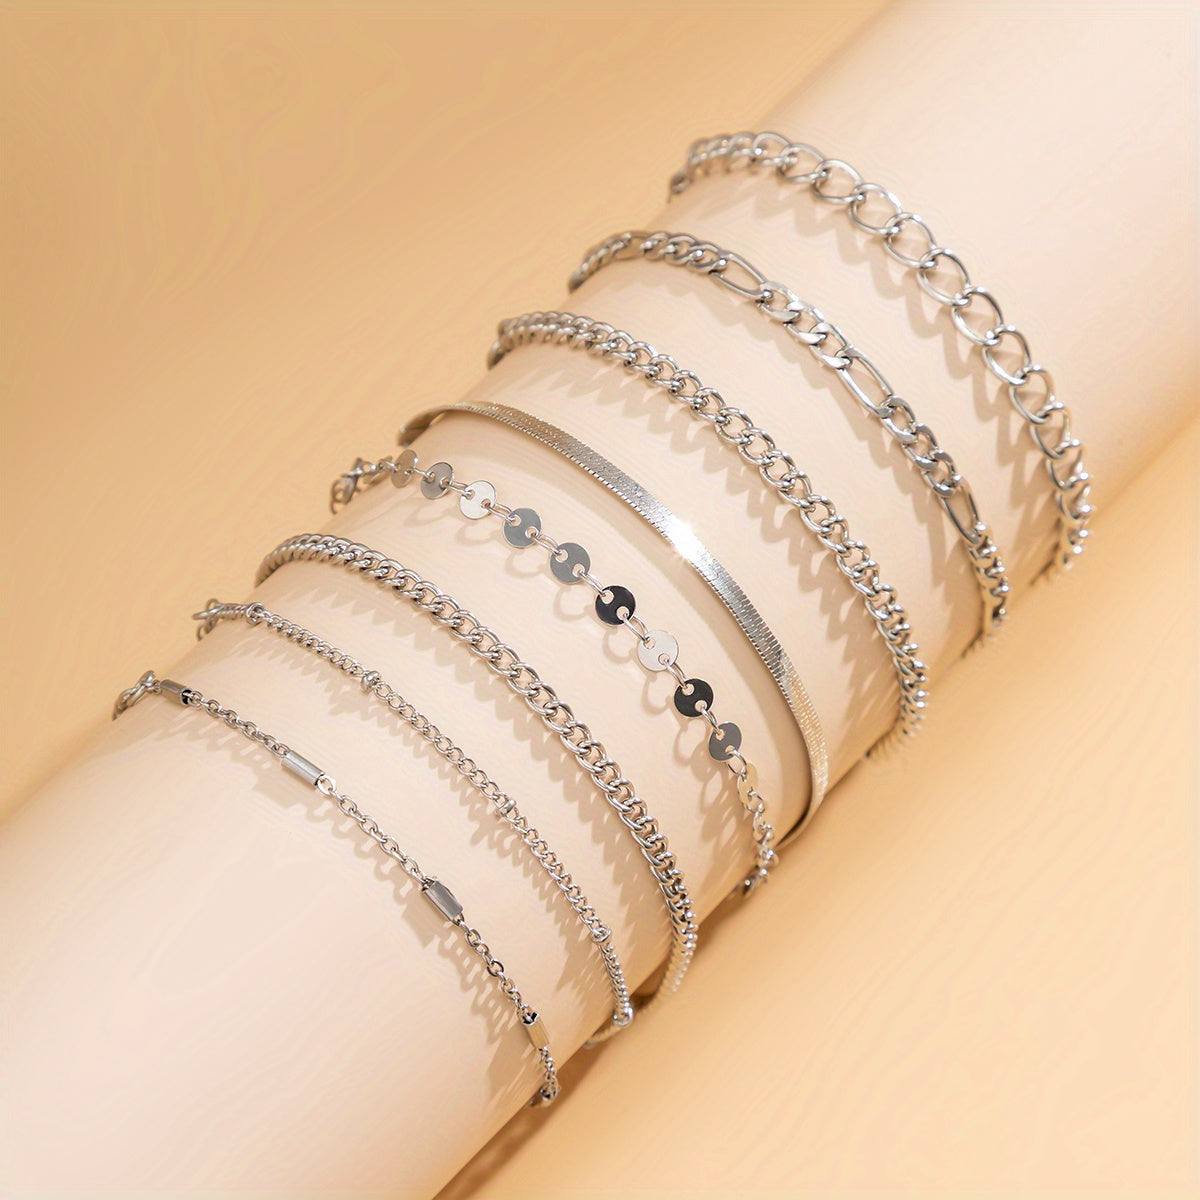 Complete Your Look with our 8 Piece Geometric Chain Bracelet Set - Adjustable Alloy Metal Jewelry Accessories